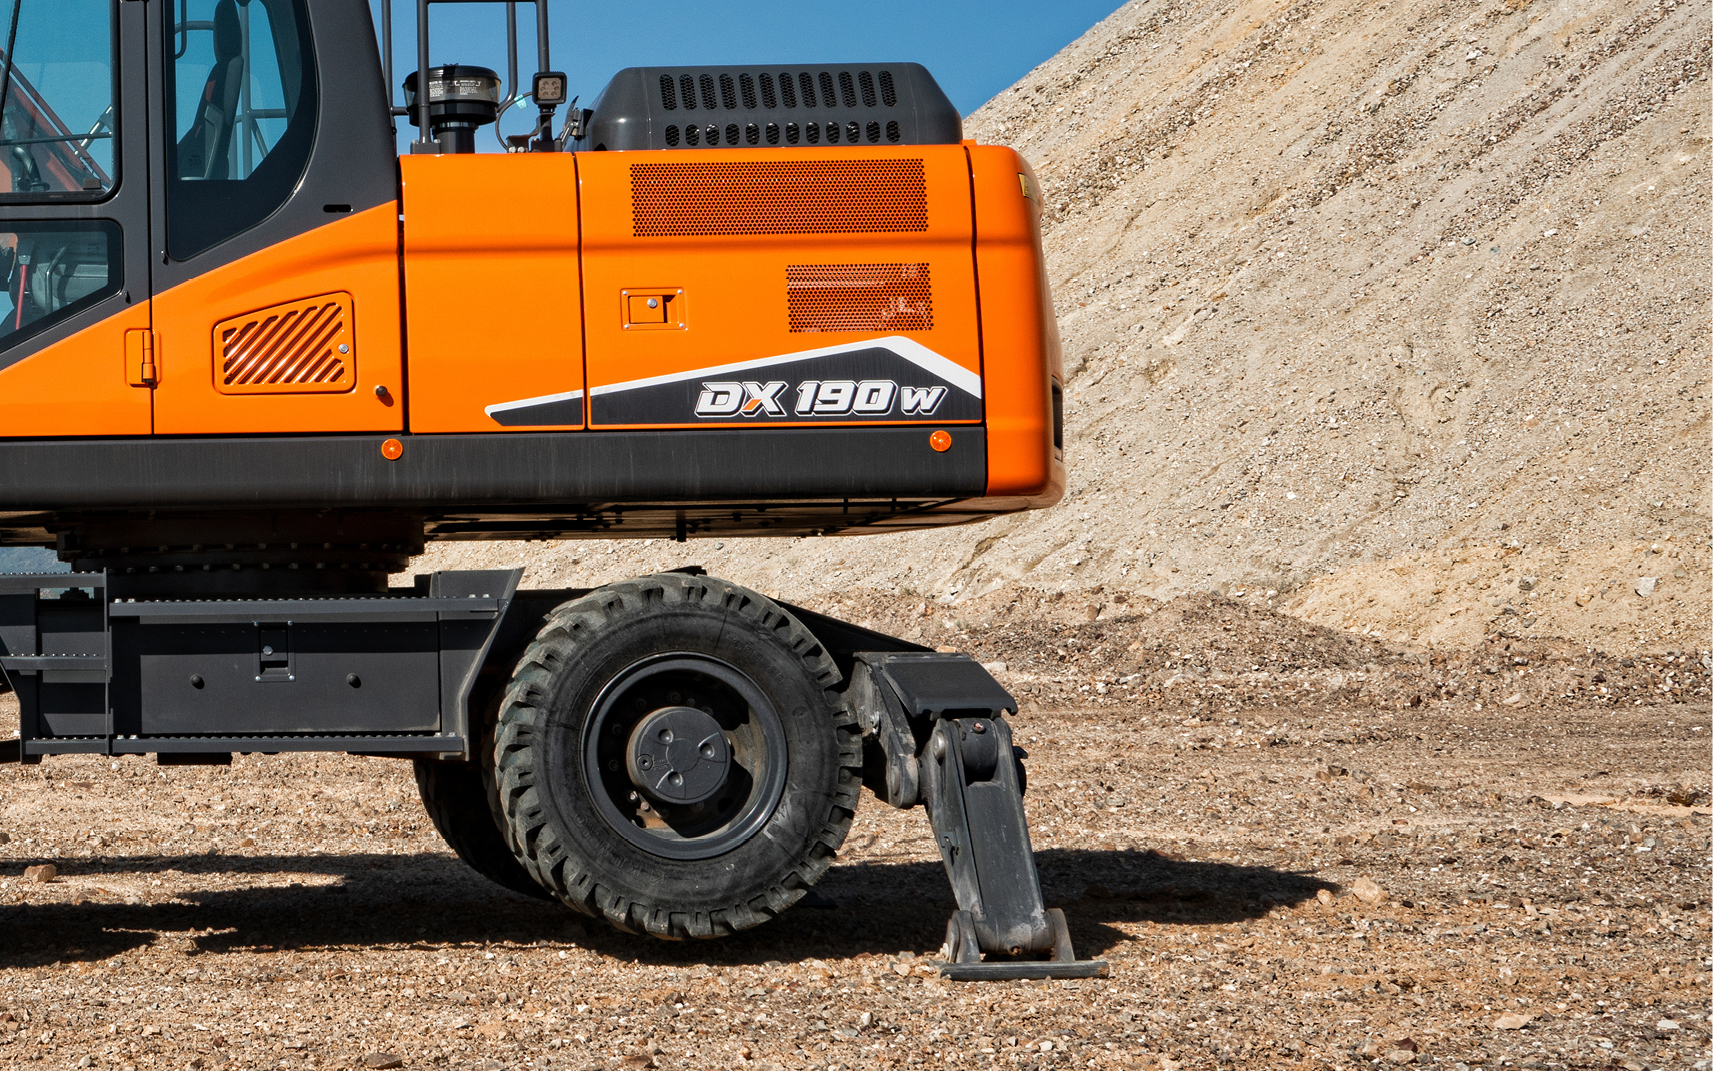 Outriggers provide additional stability for wheel excavators.